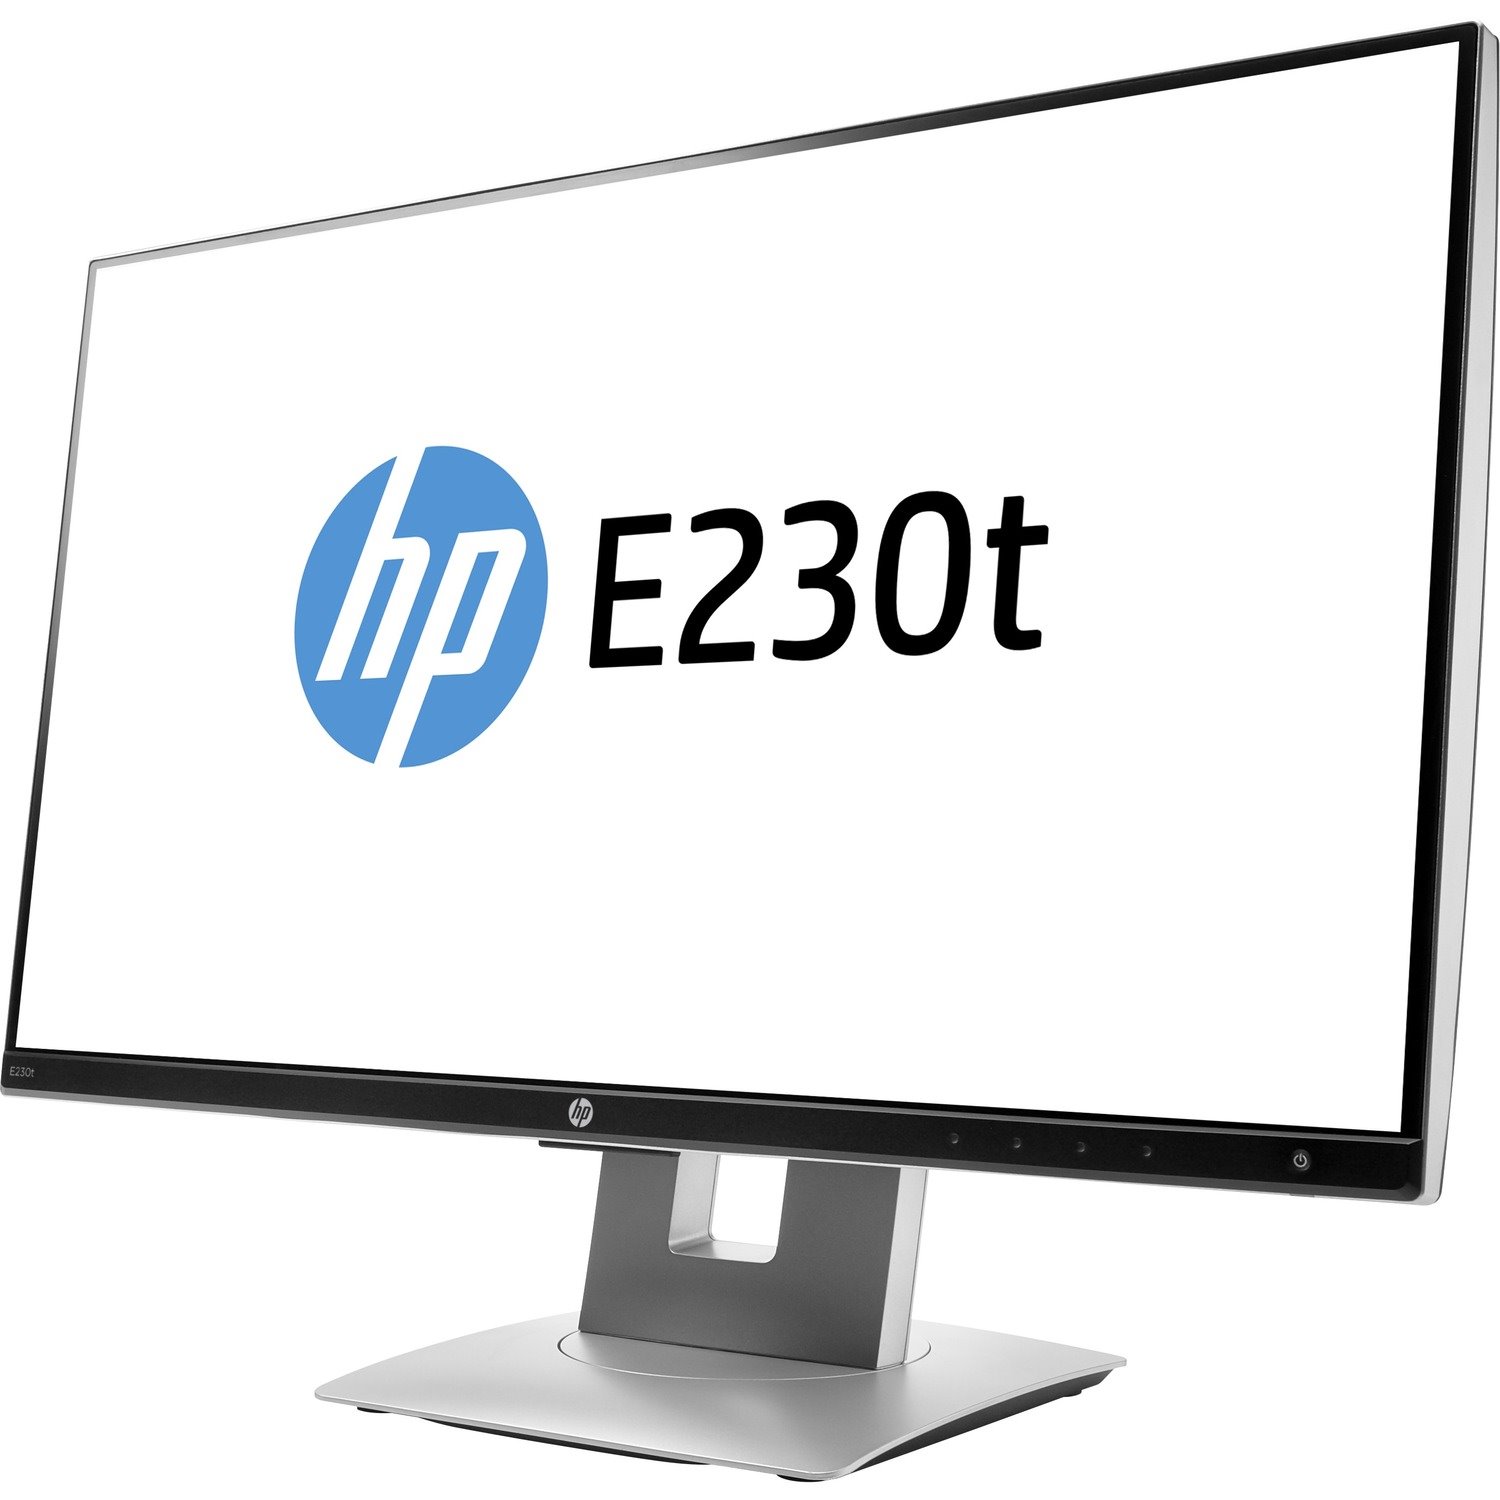 HP Business E230t 23" LCD Touchscreen Monitor - 16:9 - 5 ms